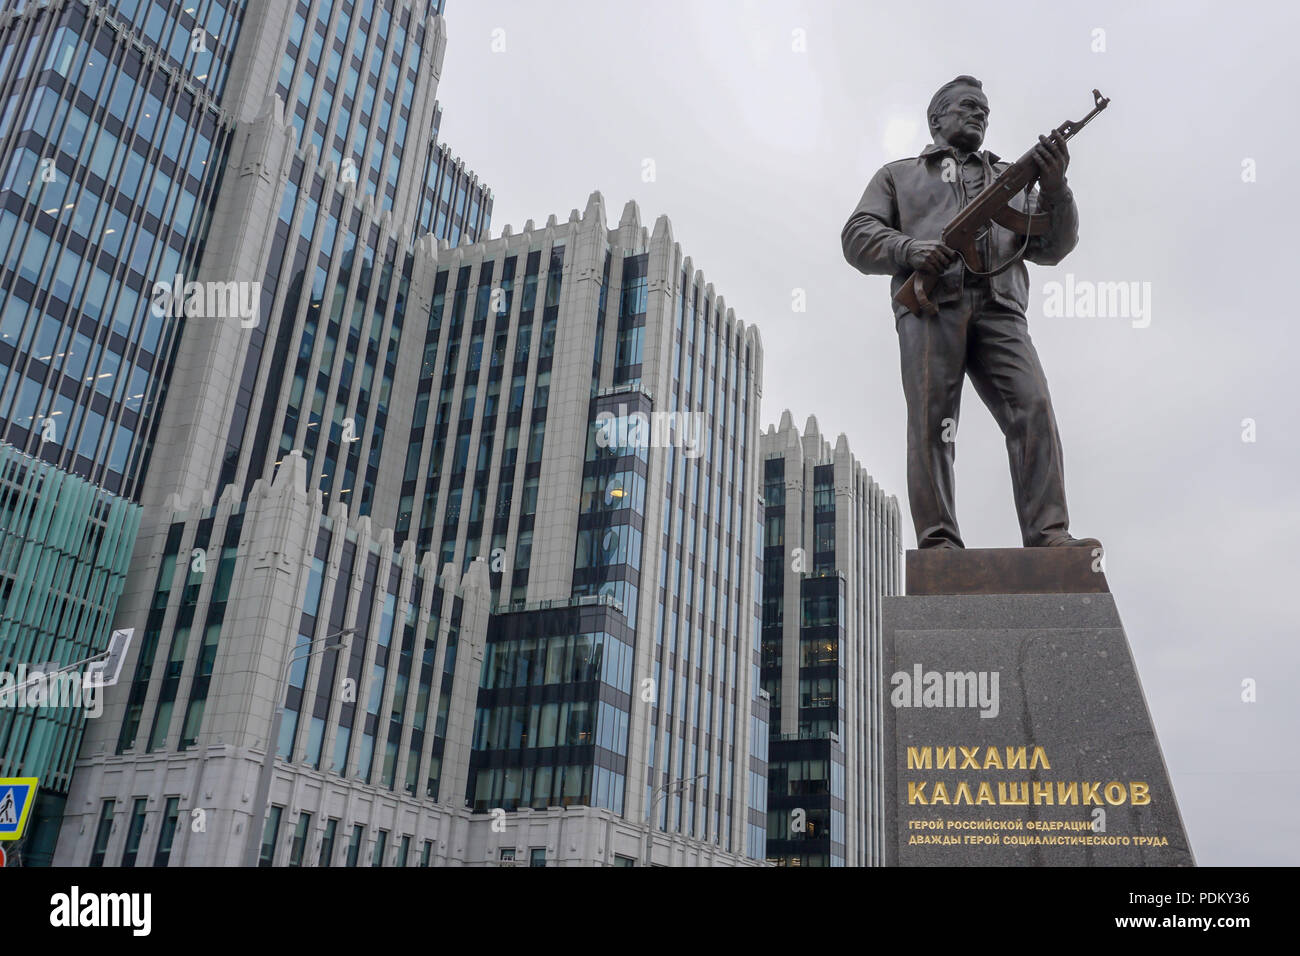 A statue of Mikhail Kalashnikov, the inventor of the AK-47 assault rifle, in central Moscow by sculptor Salavat Shcherbakov. Stock Photo